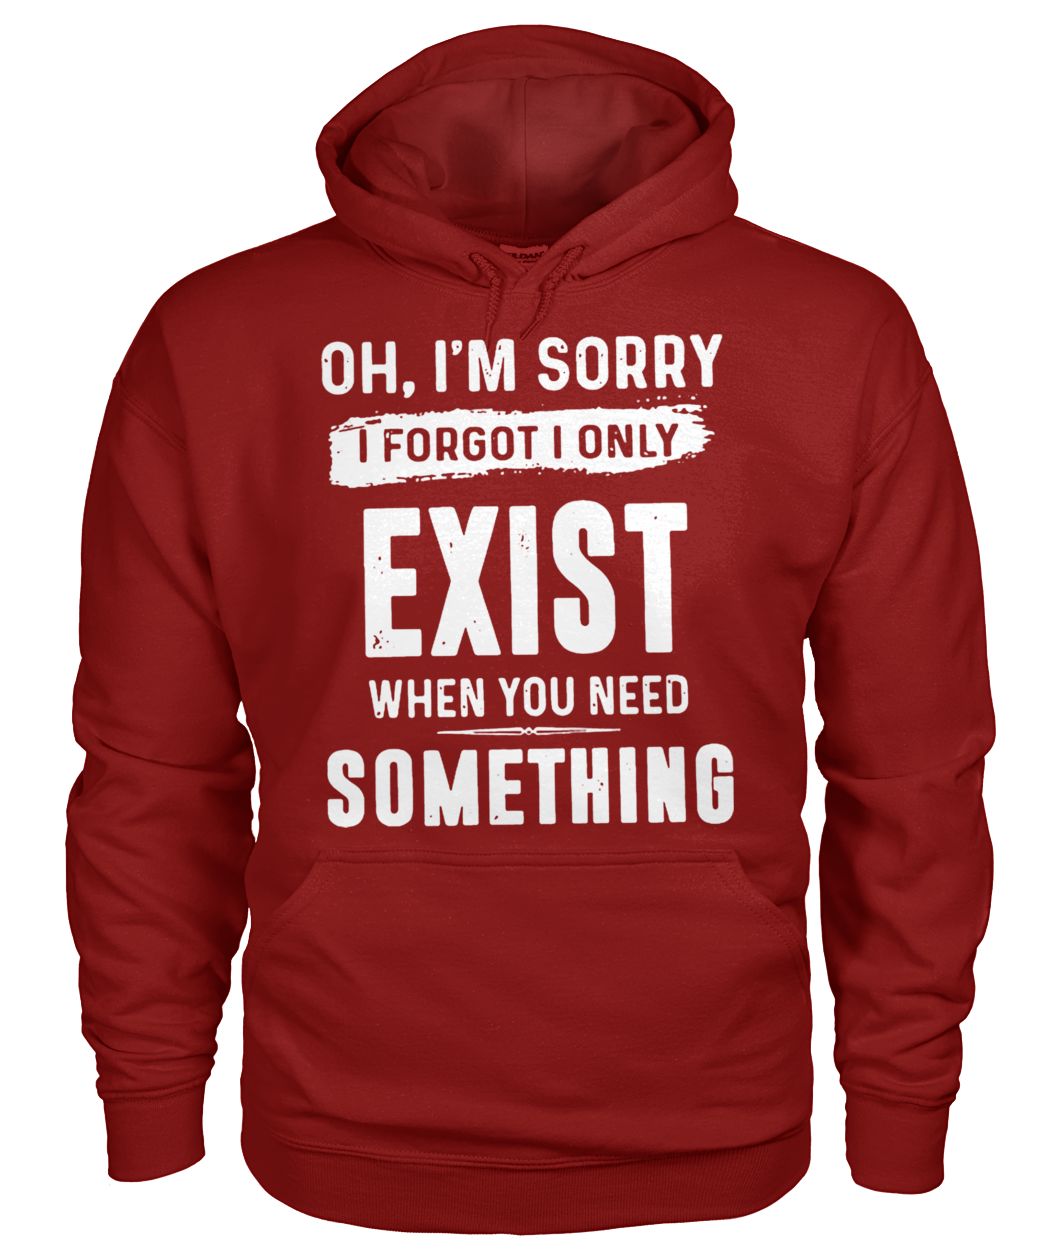 Oh I'm sorry I forgot I only exist when you need something gildan hoodie